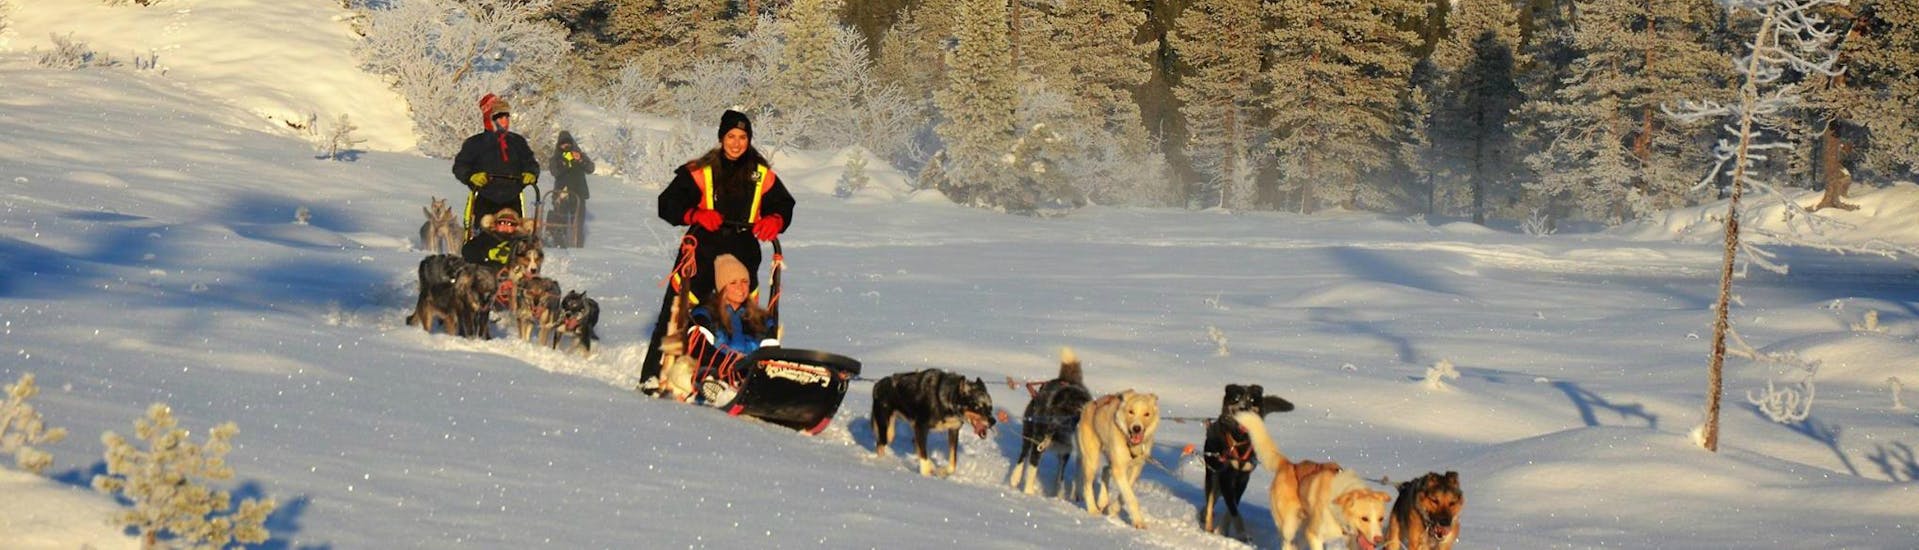 The participants of the Dog Sledding near Trondheim in Kopperå - 2 Day Tour with Norway Husky Adventure are having fun while mushing their team of sled dogs through the glistening snow.